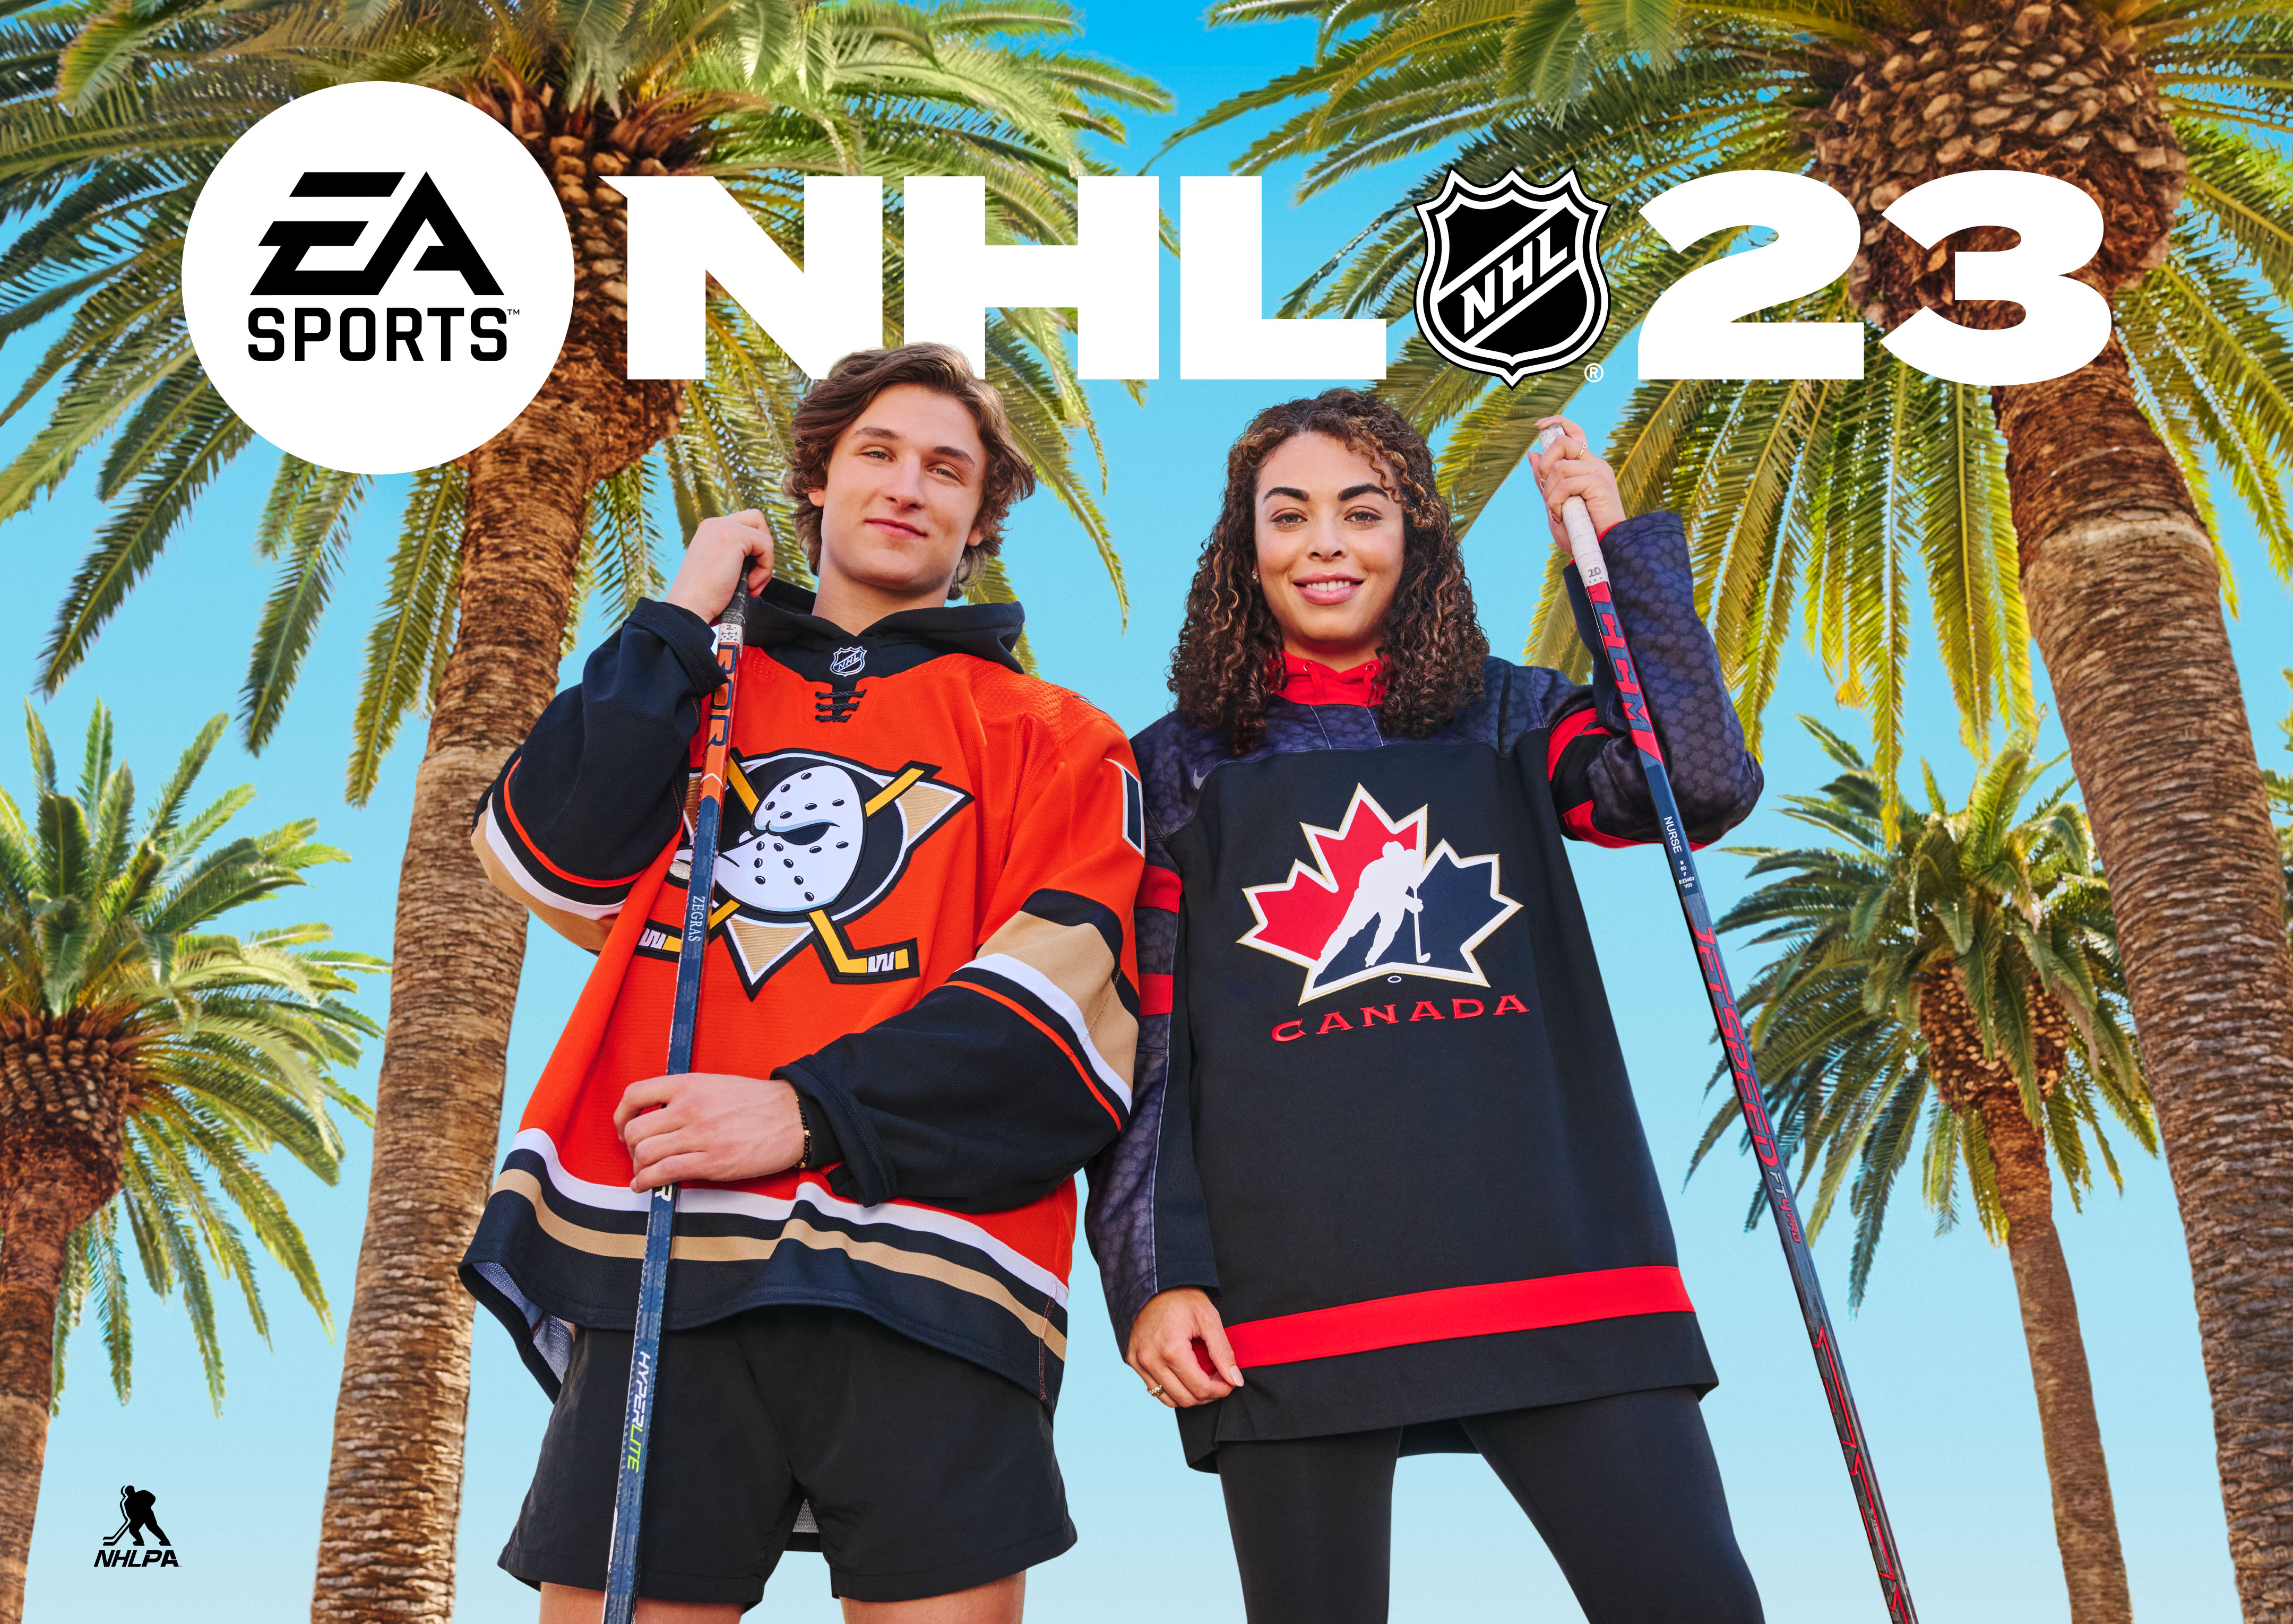 EA SPORTS NHL on X: Reverse Retro jerseys have made their #NHL23